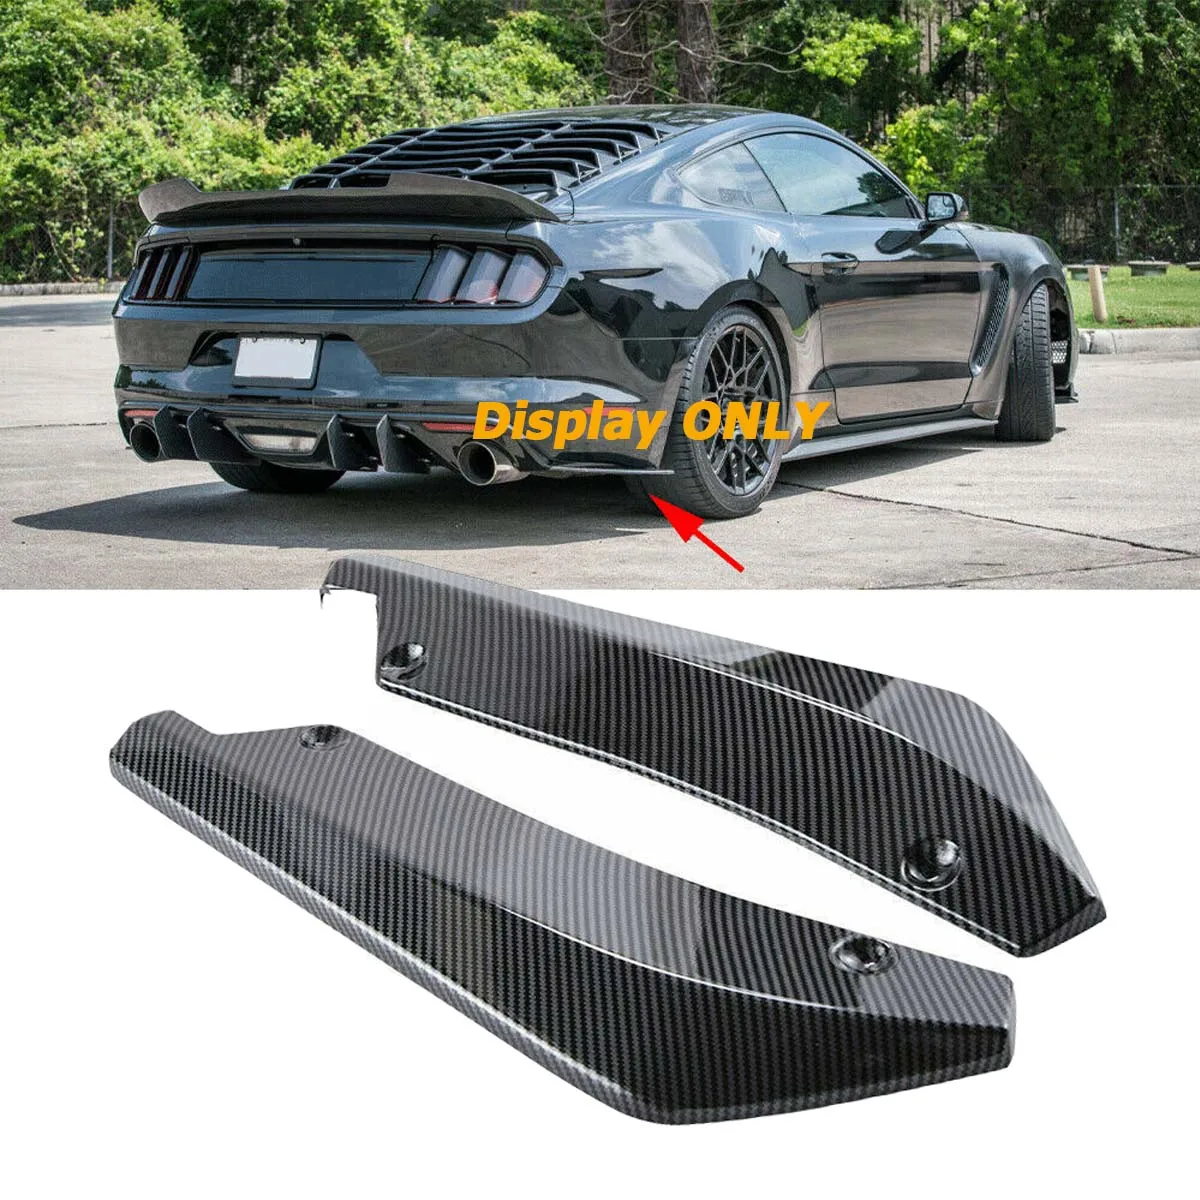 2pcs Rear Bumper Splitter Lip Diffuser Canard Spoiler Body Kit Protection Guards For Ford Mustang 2000-2021 2022 Car Accessories